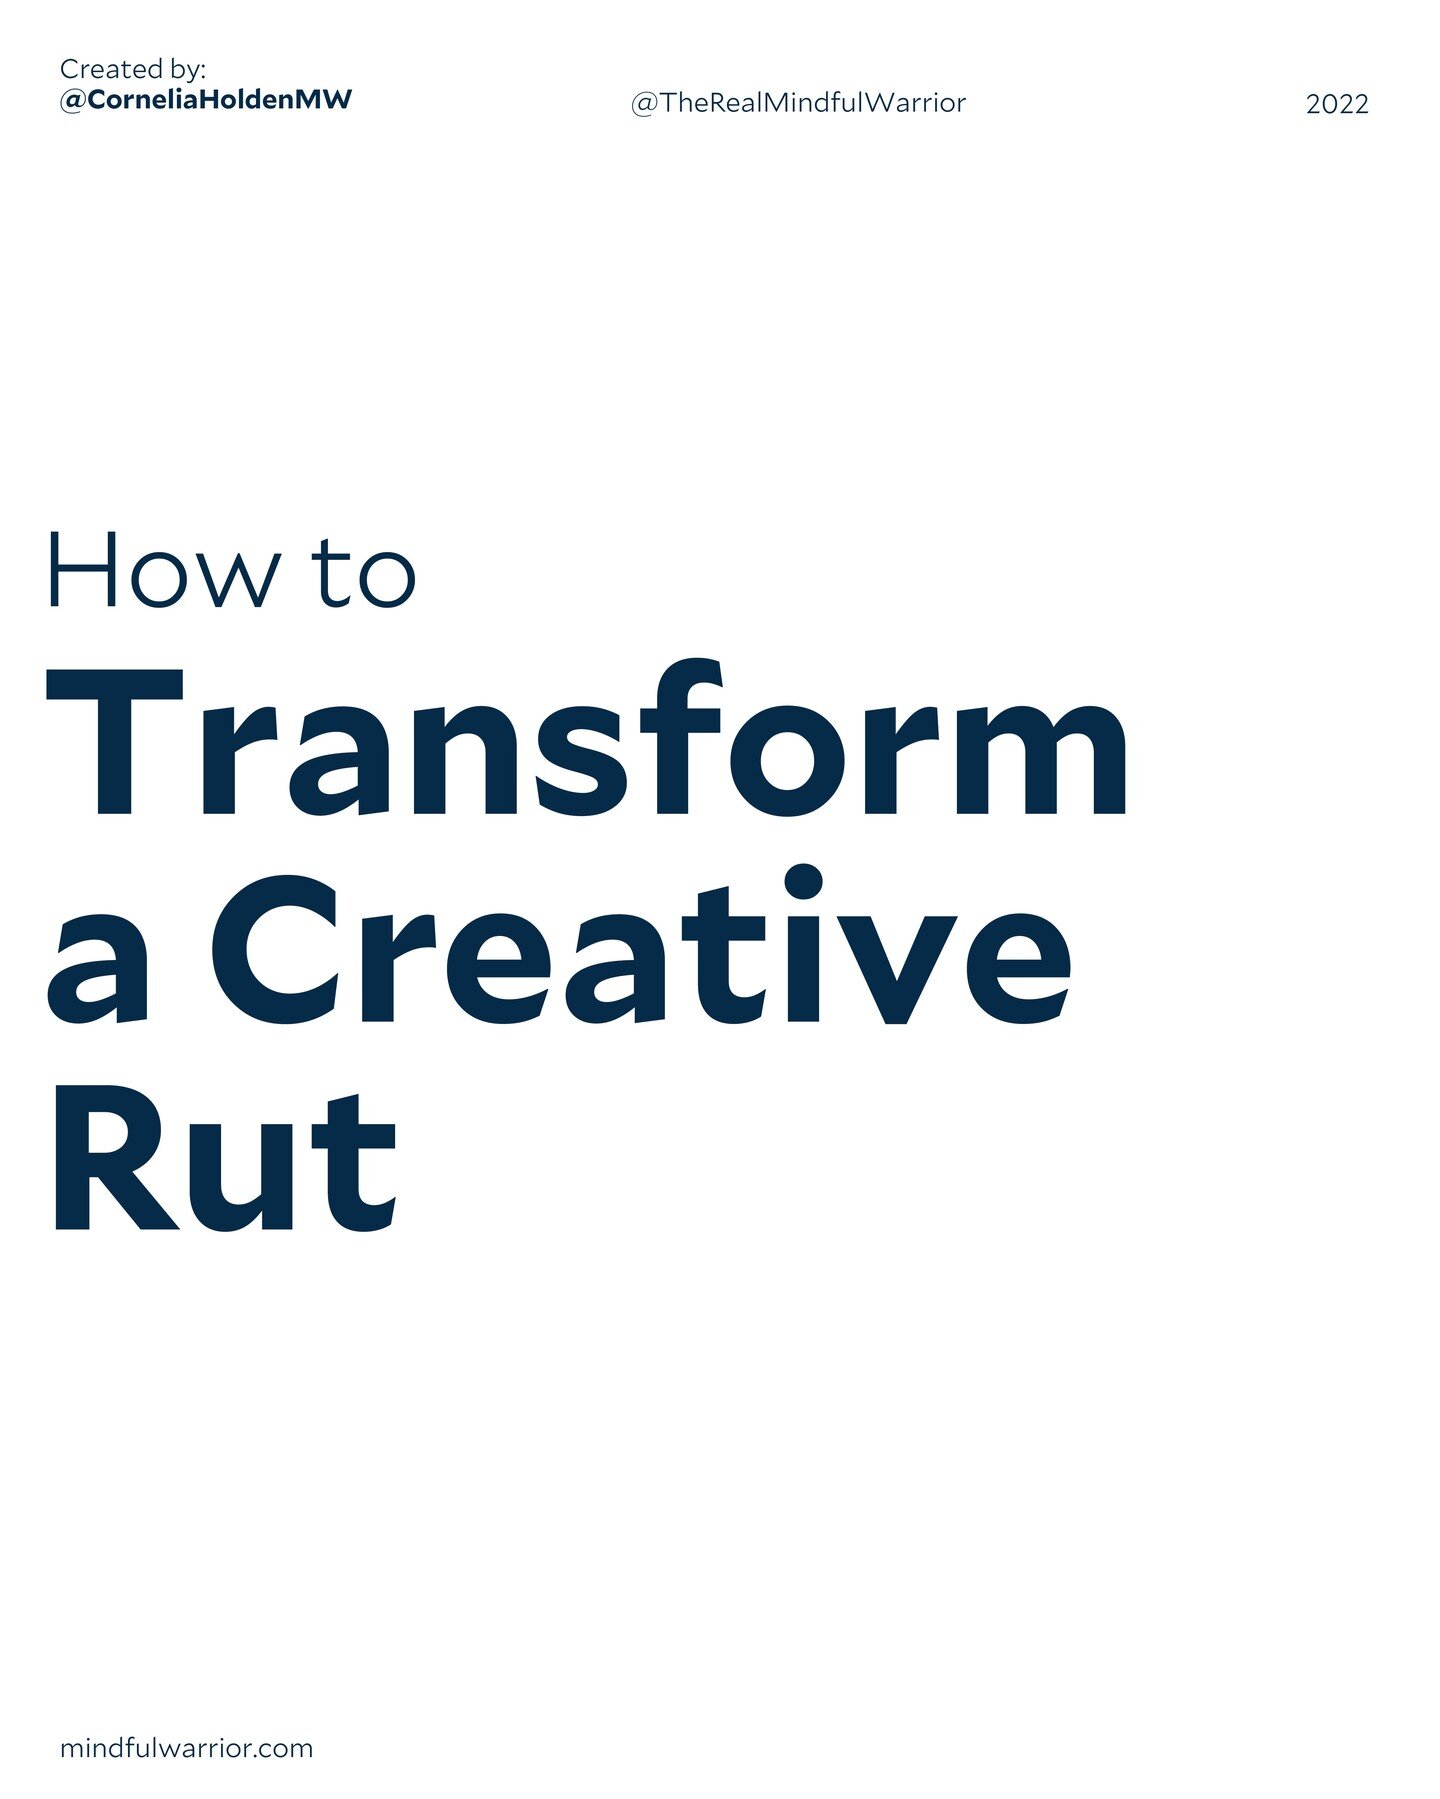 Oh no! I&rsquo;m in a creative rut! Getting stuck when you&rsquo;re trying to ignite inspiration and imagination can feel impossible to break through. But luckily, there are some tricks to help shed some of that stickiness and find the spark again. #